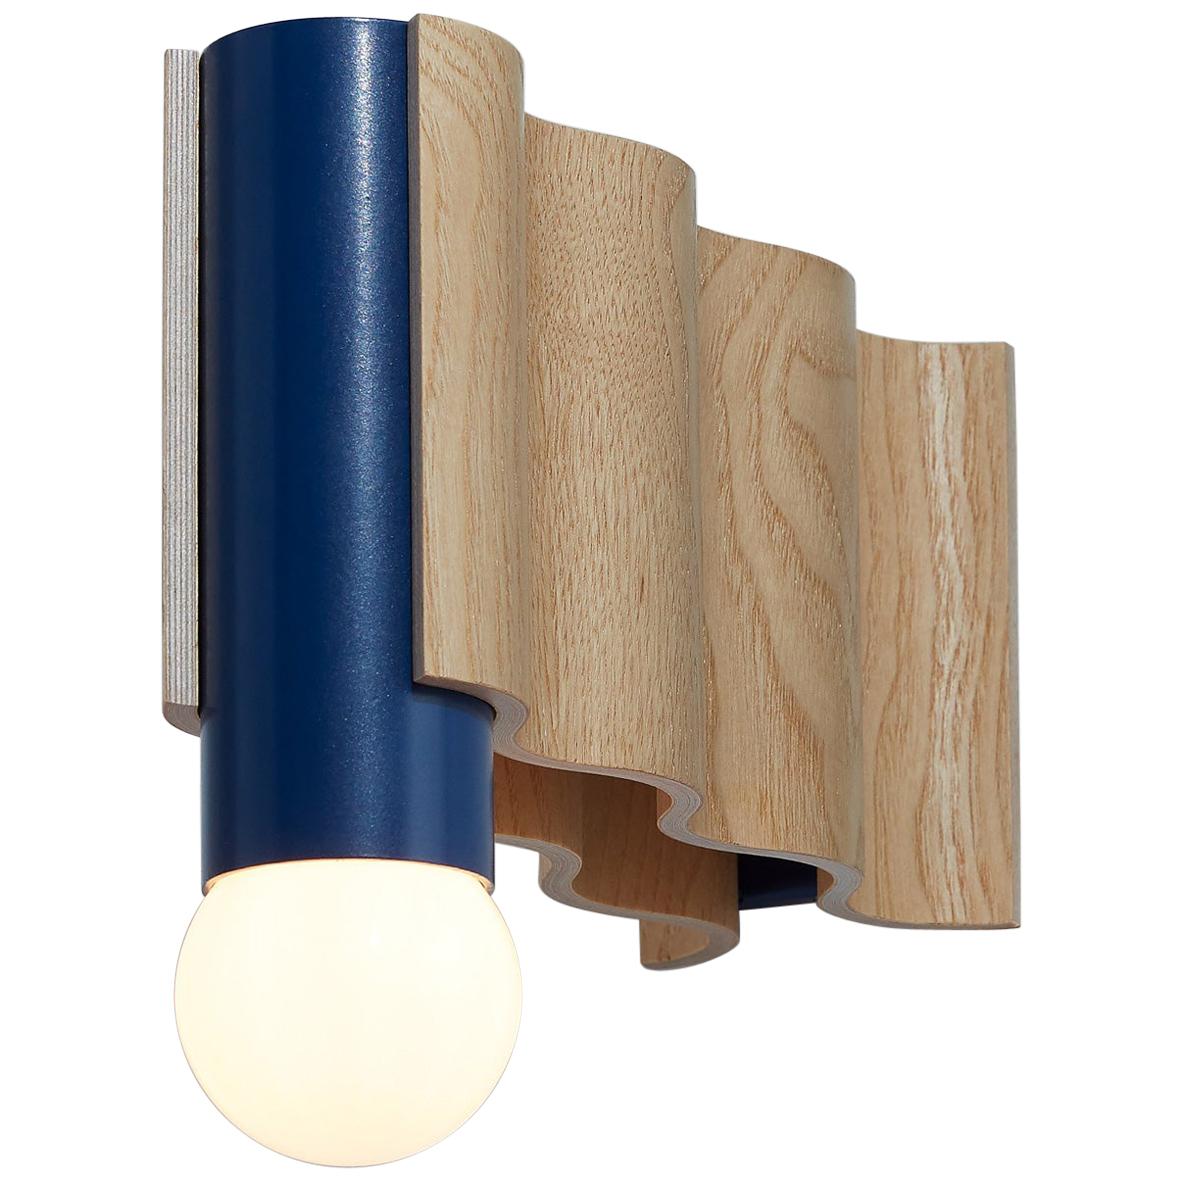 Single Corrugation Sconce or Wall Light in Natural Ash Veneer and Sapphire Blue